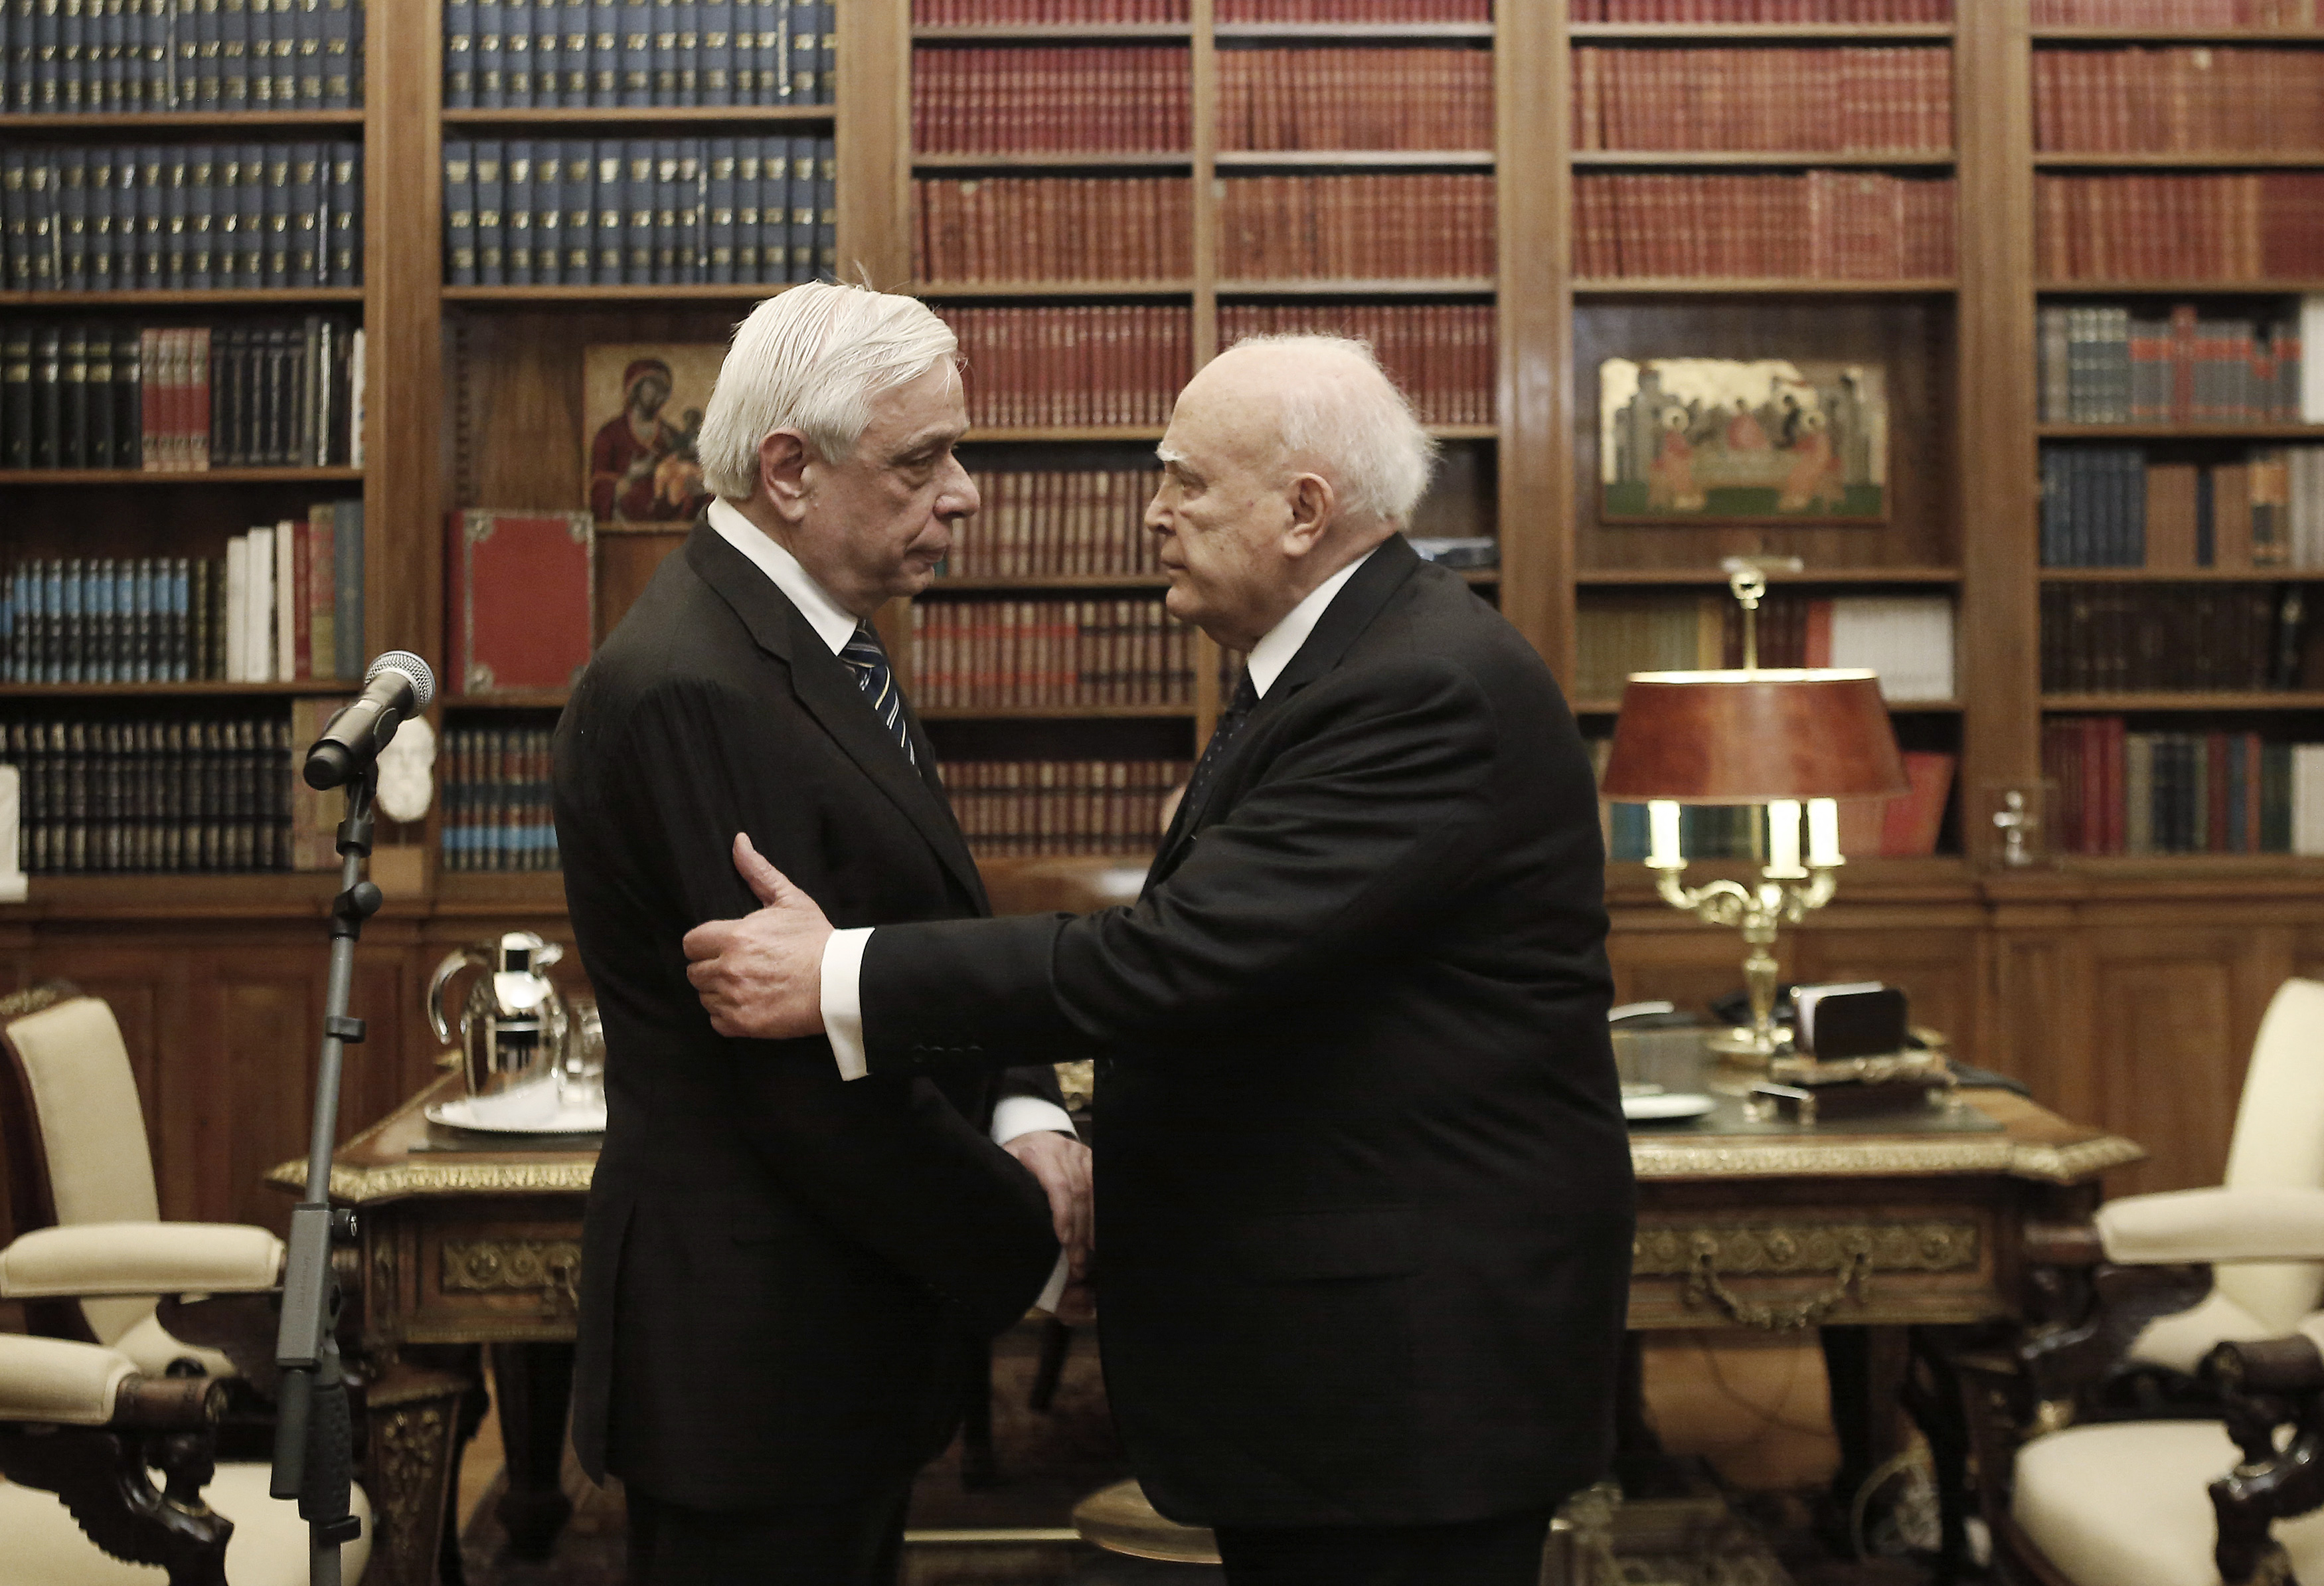 Outgoing Greek President Papoulias shakes hands with newly elected President Pavlopoulos during a handover ceremony at the Presidential Palace in Athens